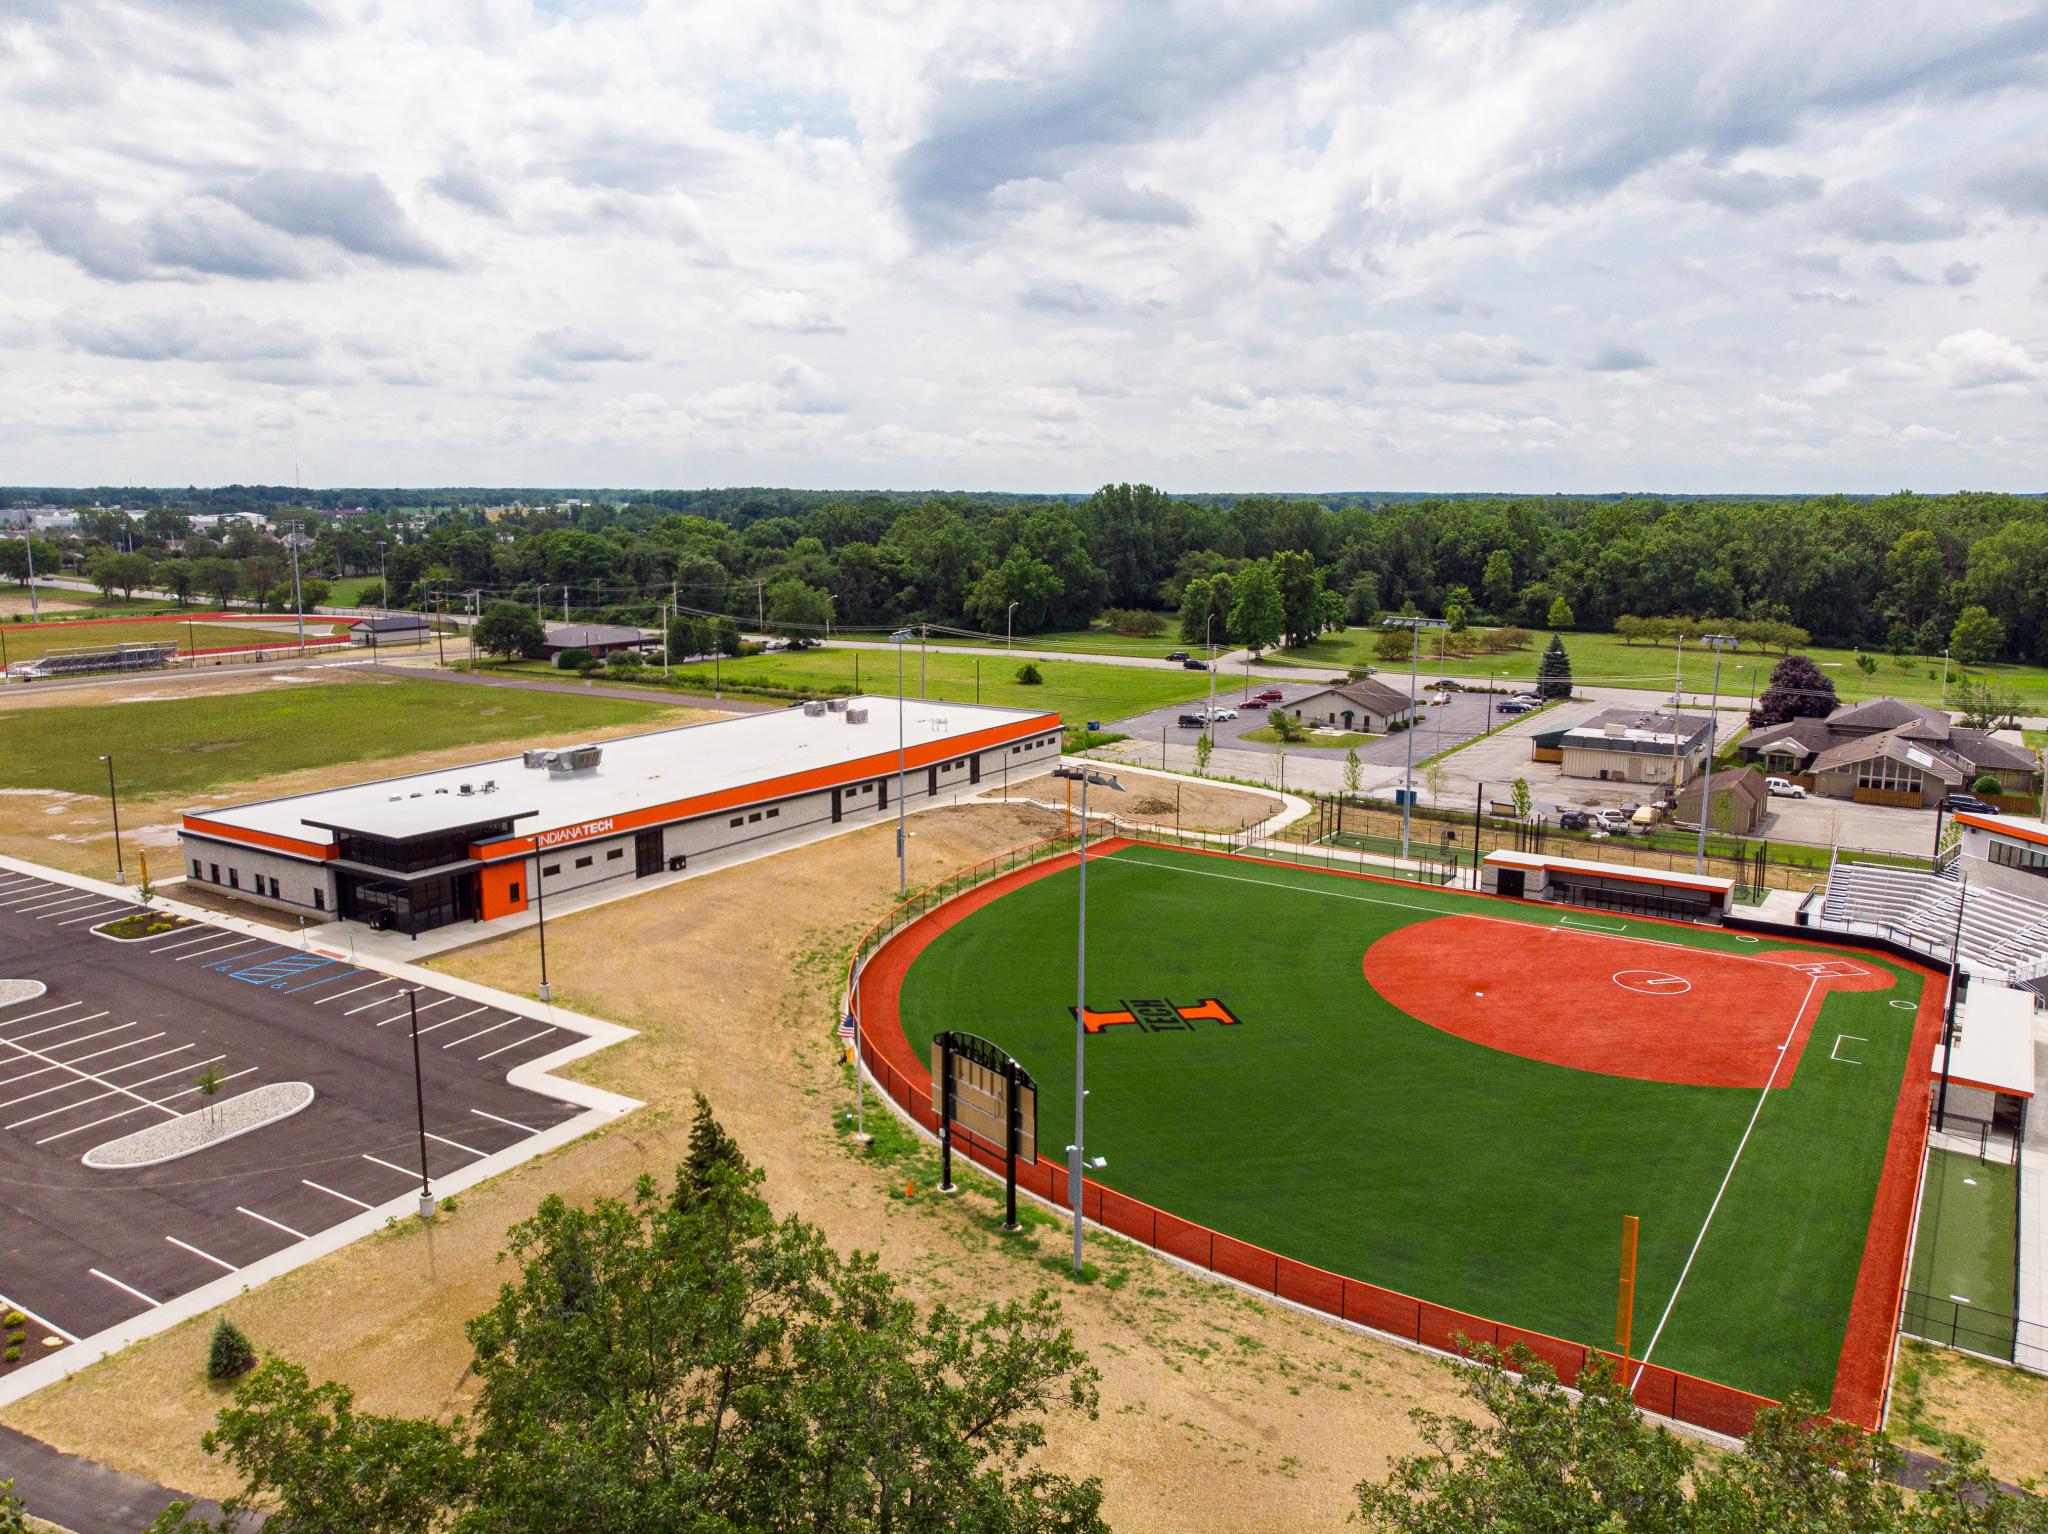 drone image of a softball field and building